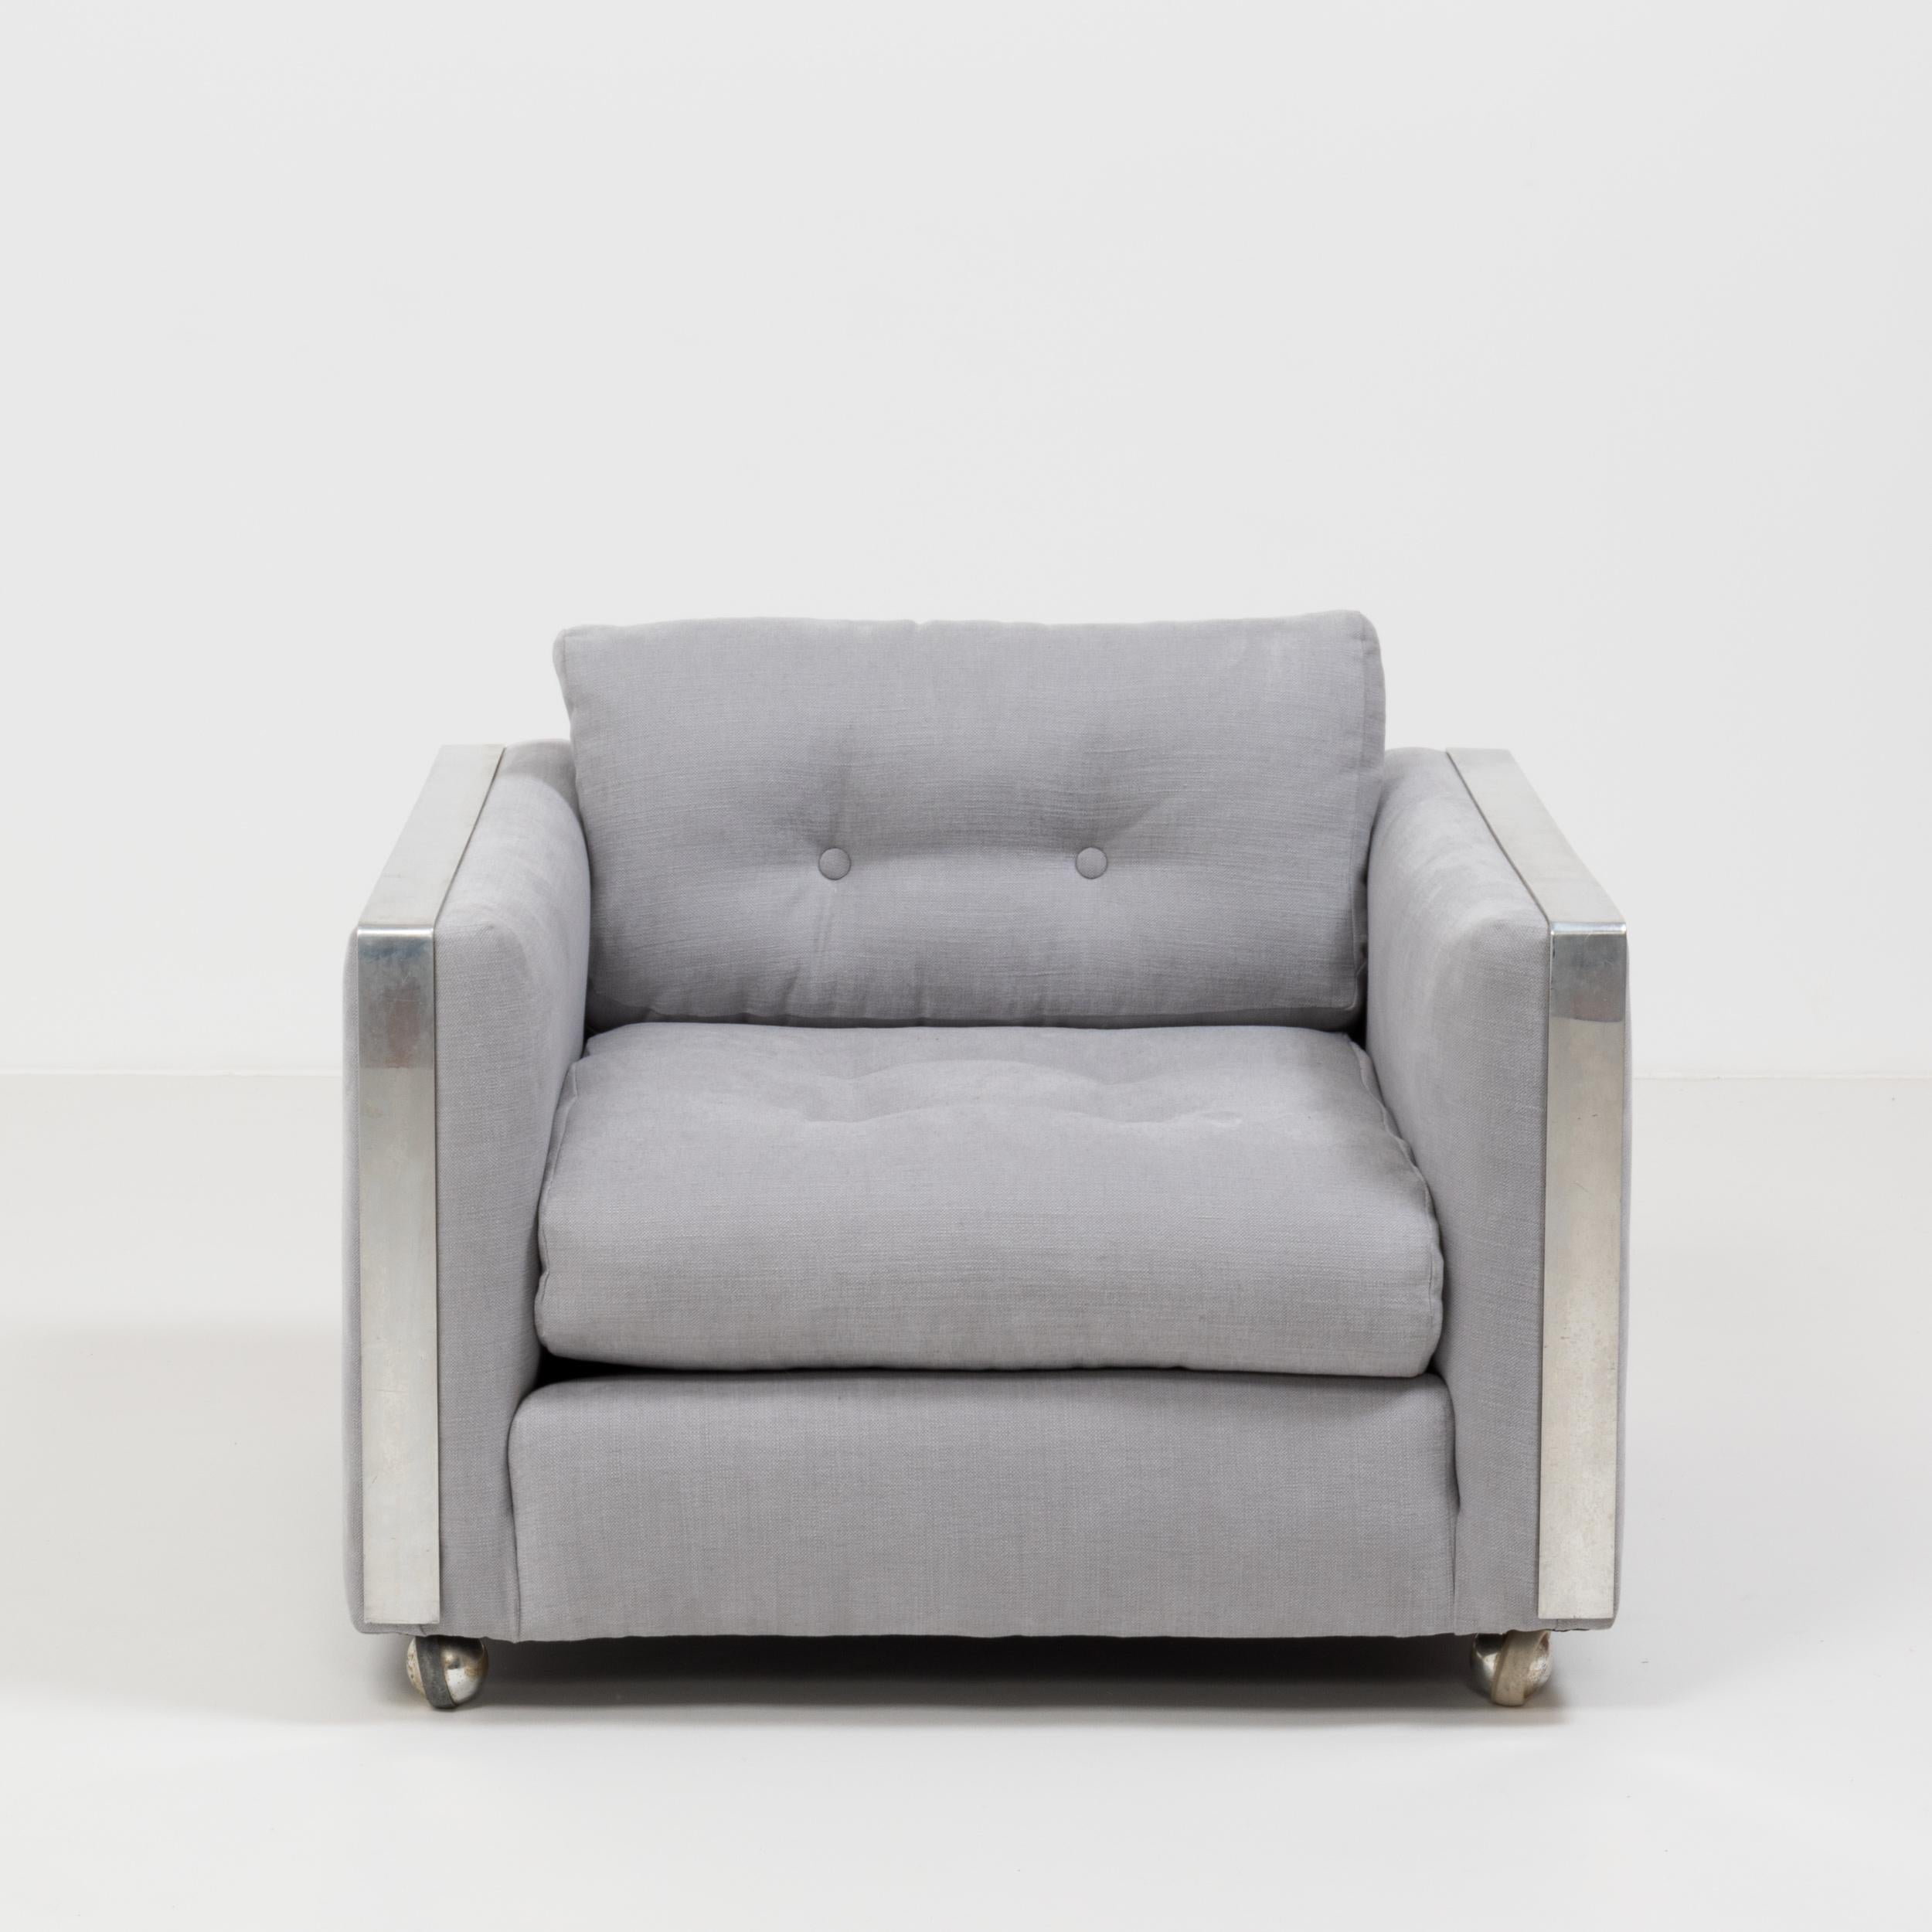 Designed in the style of Milo Baughman, this sleek midcentury armchair has been newly upholstered in a sumptuously soft and airy grey Linara fabric that compliments the chrome detailing perfectly.
 
With its clean lines and cool aesthetic it